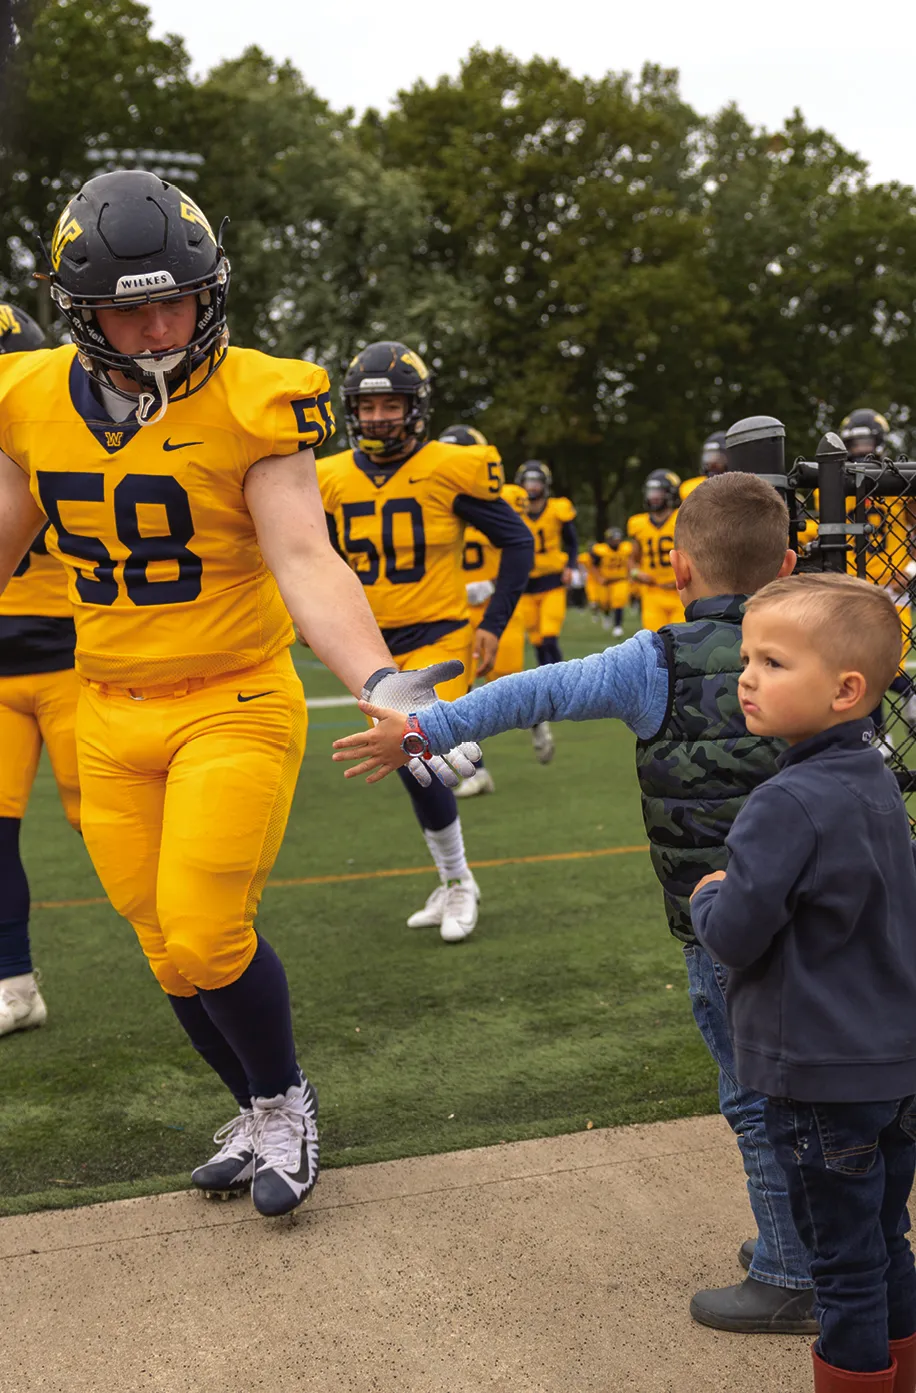 Wilkes football players giving handshakes to two small kids